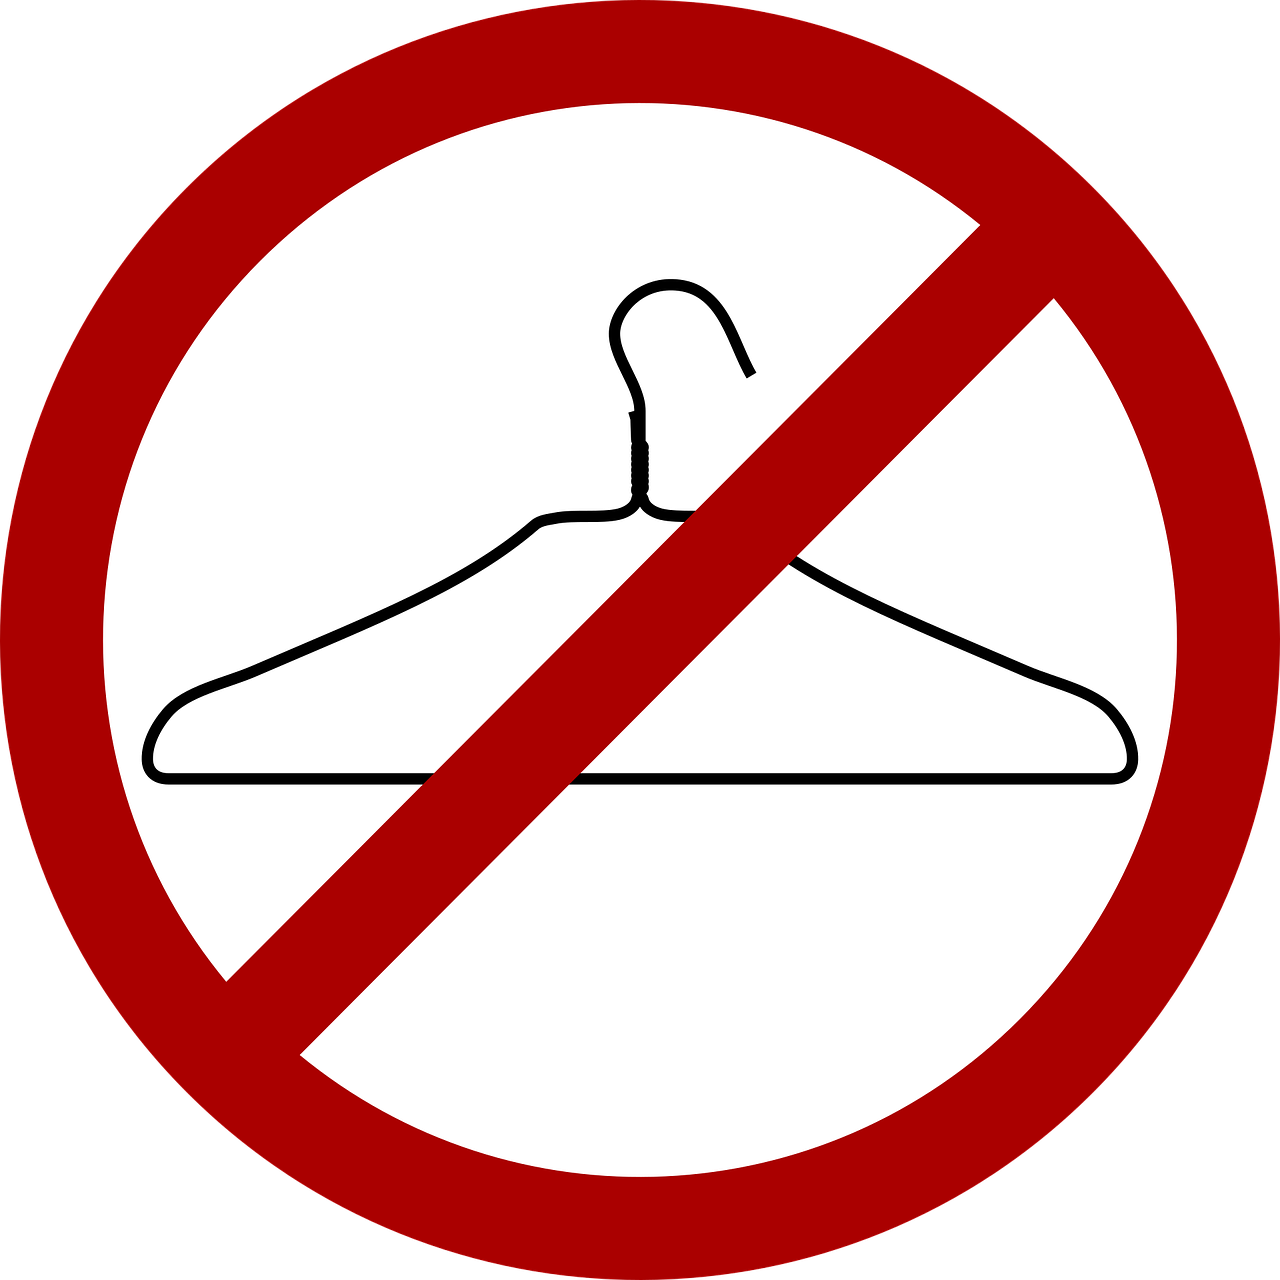 A graphic of a wire coathanger. It is within a traffic-type sign, a red circle with a red diagonal line across it. The meaning is 'No Coathangers'.